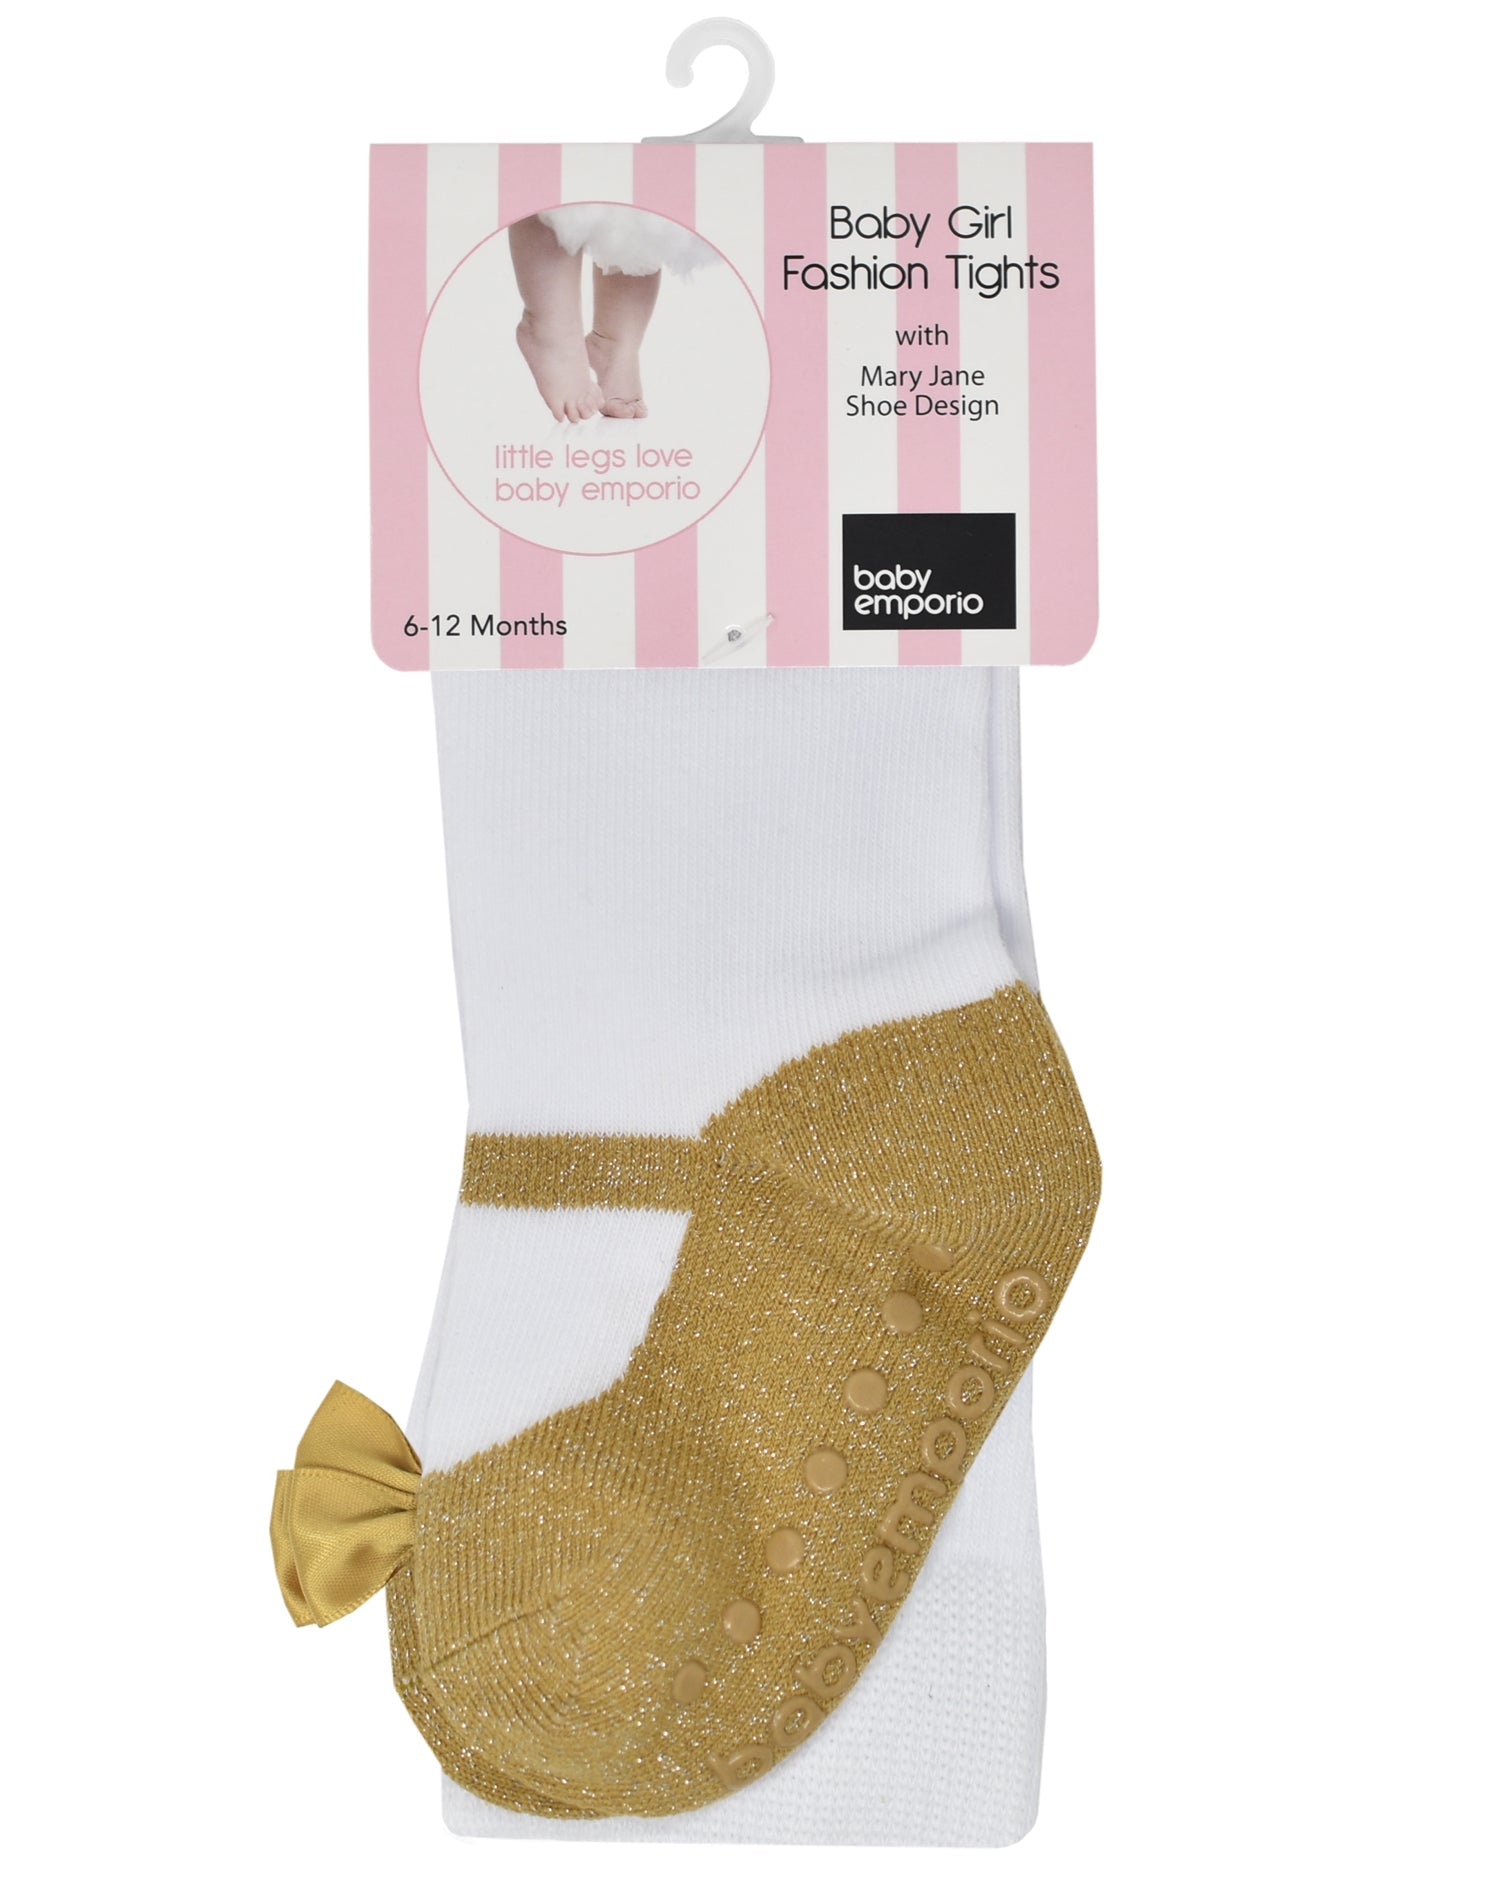 Baby Emporio gold tights size 6-12 months on hanger.